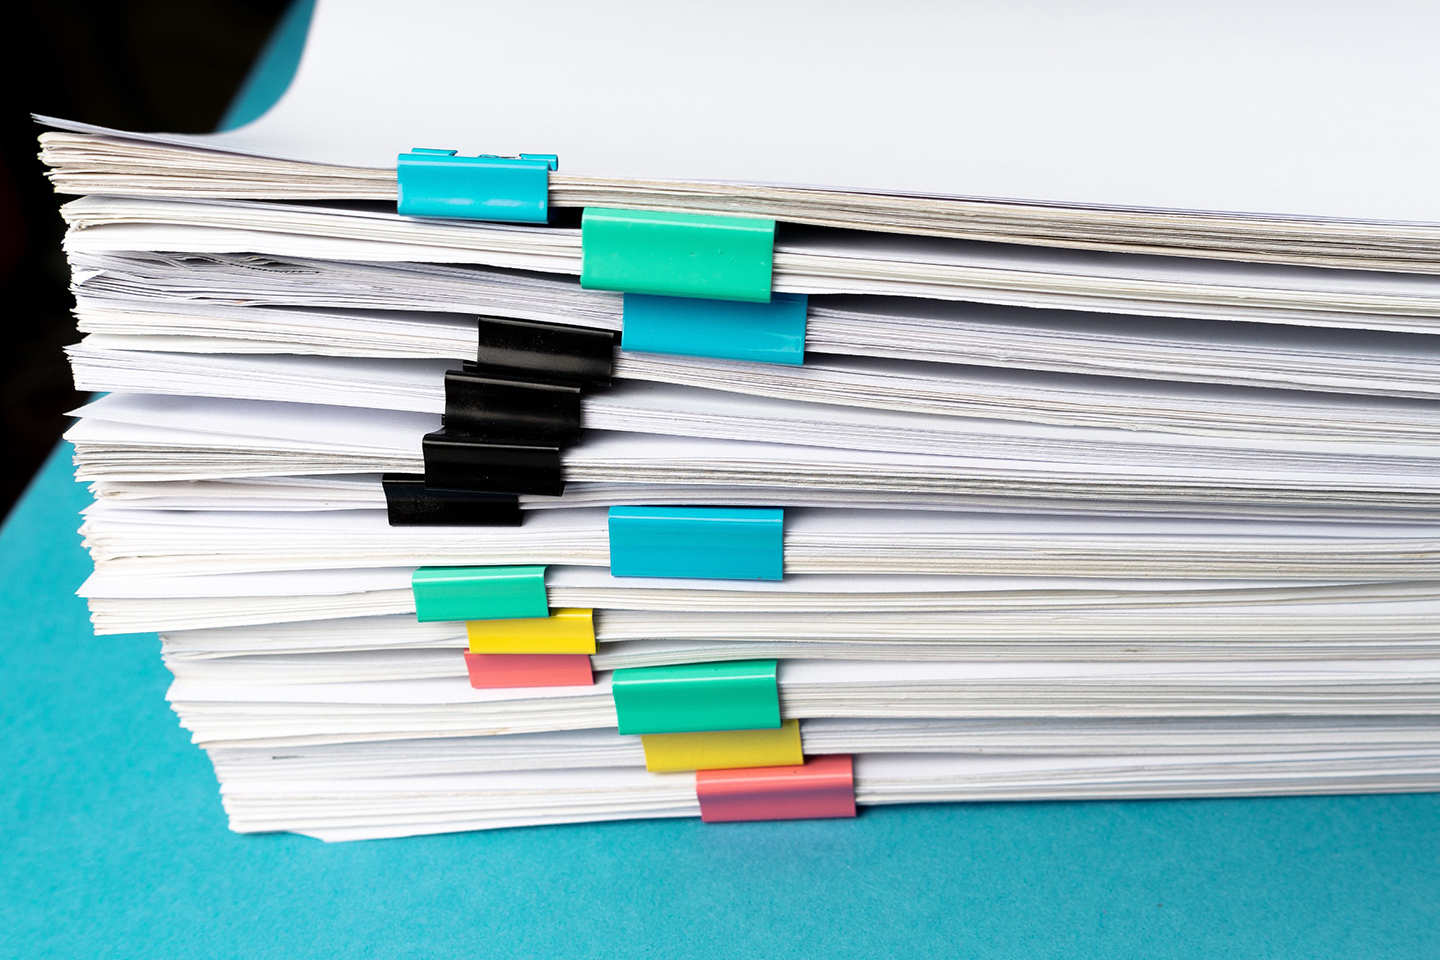 How to Document Work in Your Organization